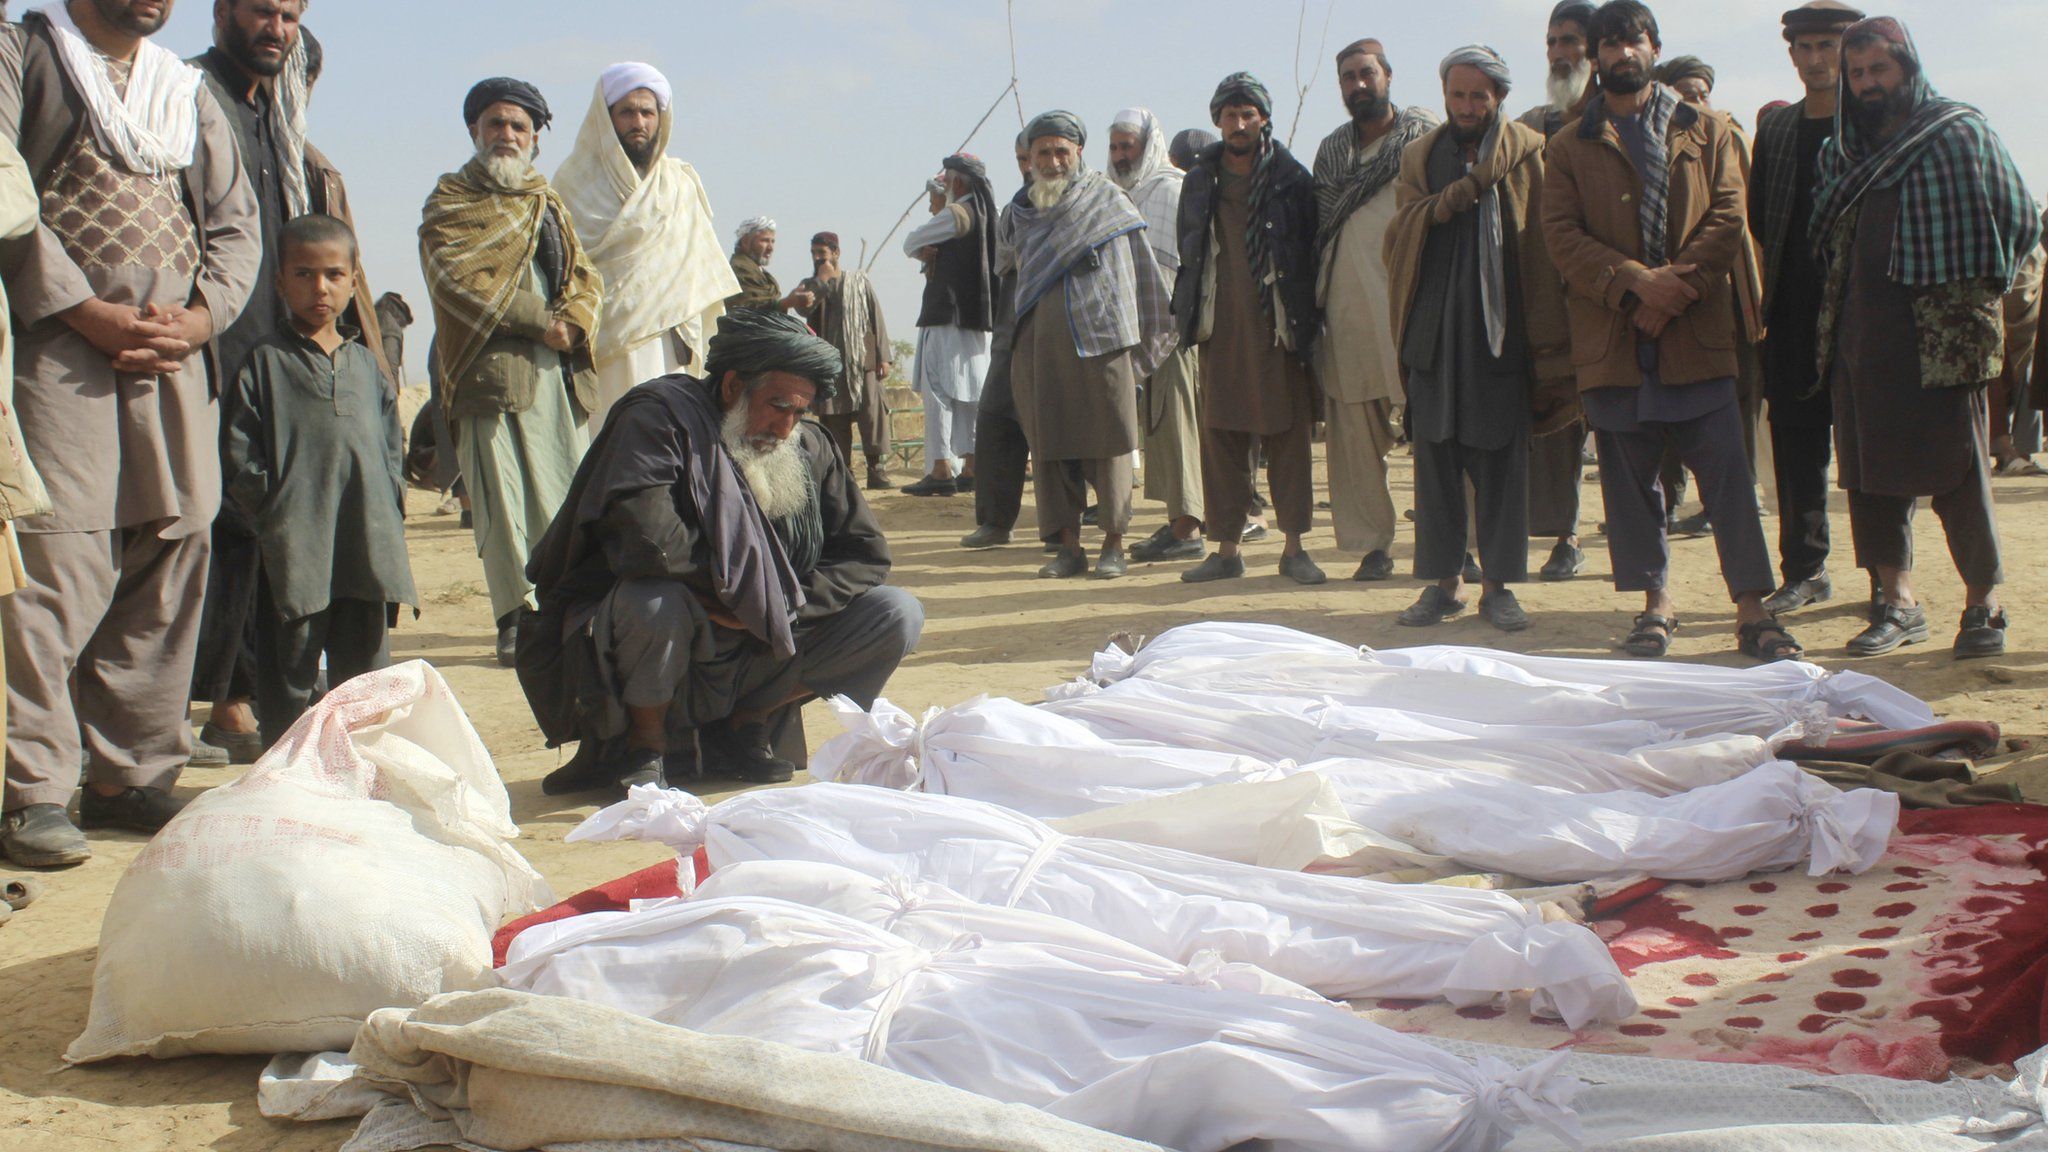 In this 4 November 2016 photo, Afghan villagers gather around several victims' bodies who were killed during clashes between Taliban and Afghan security forces in the Taliban-controlled, Buz-e Kandahari village in Kunduz province, Afghanistan